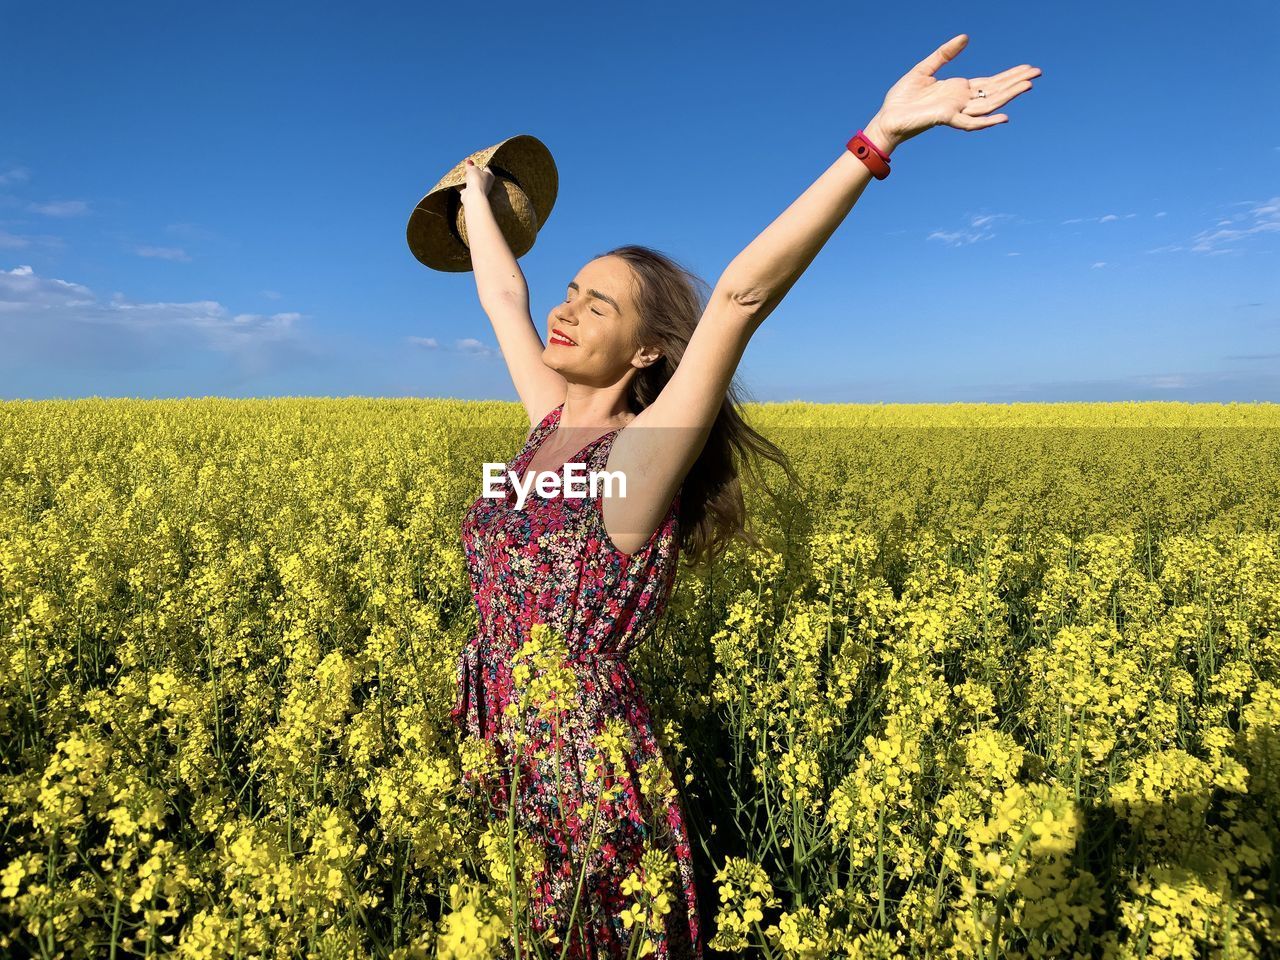 Happy woman wearing dress and hat in a field of canola flowers on a sunny day